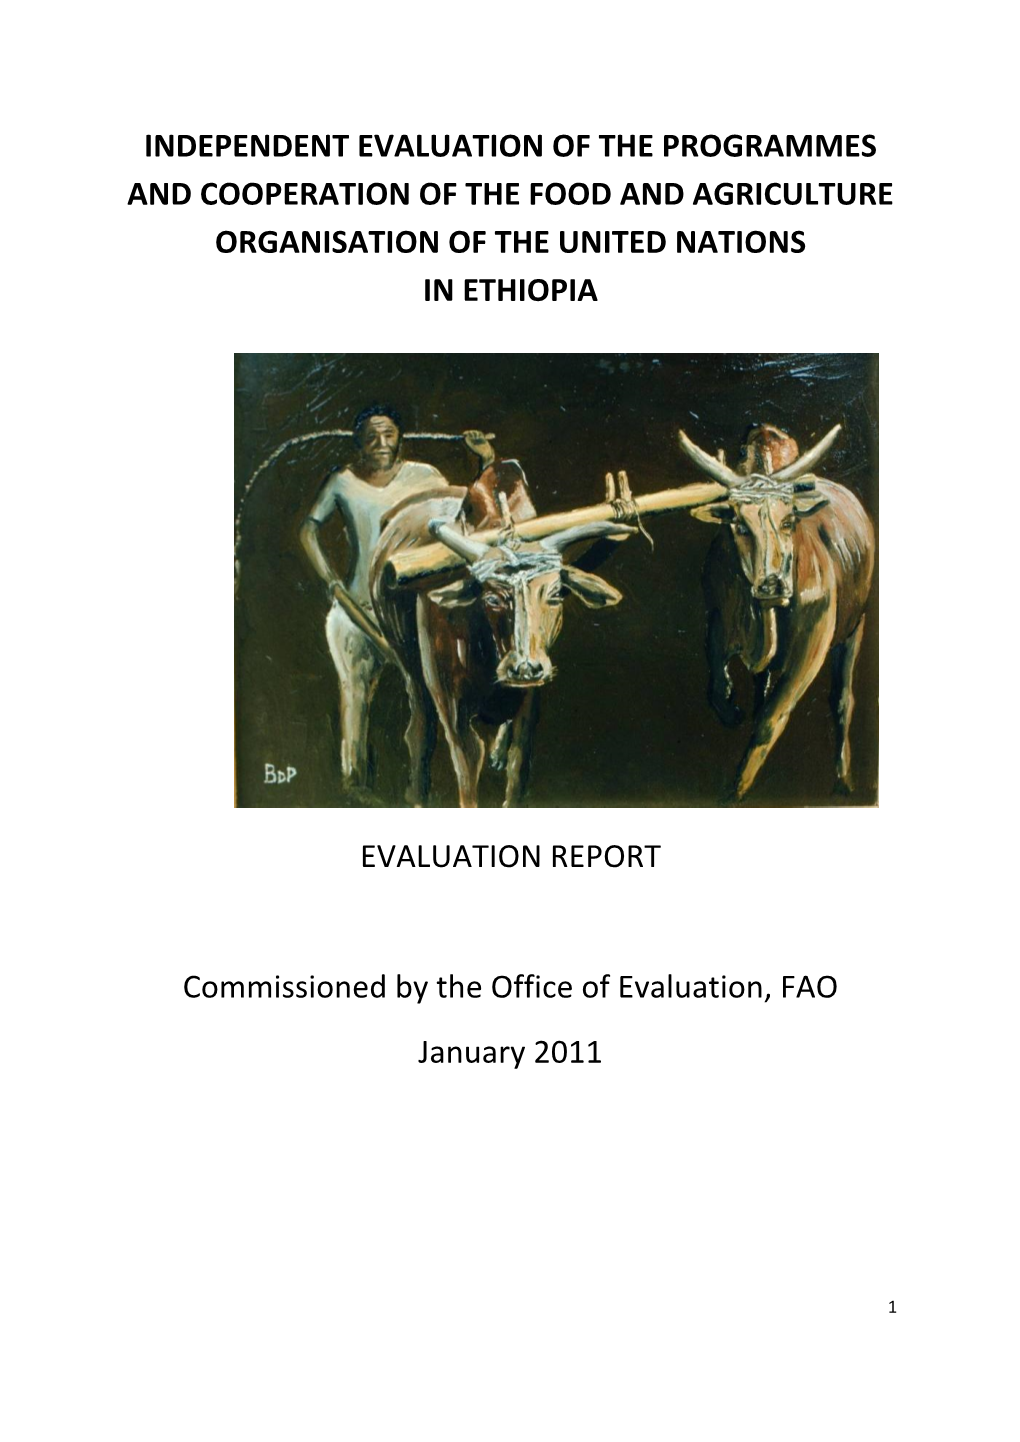 Independent Evaluation of the Programmes and Cooperation of the Food and Agriculture Organisation of the United Nations in Ethiopia